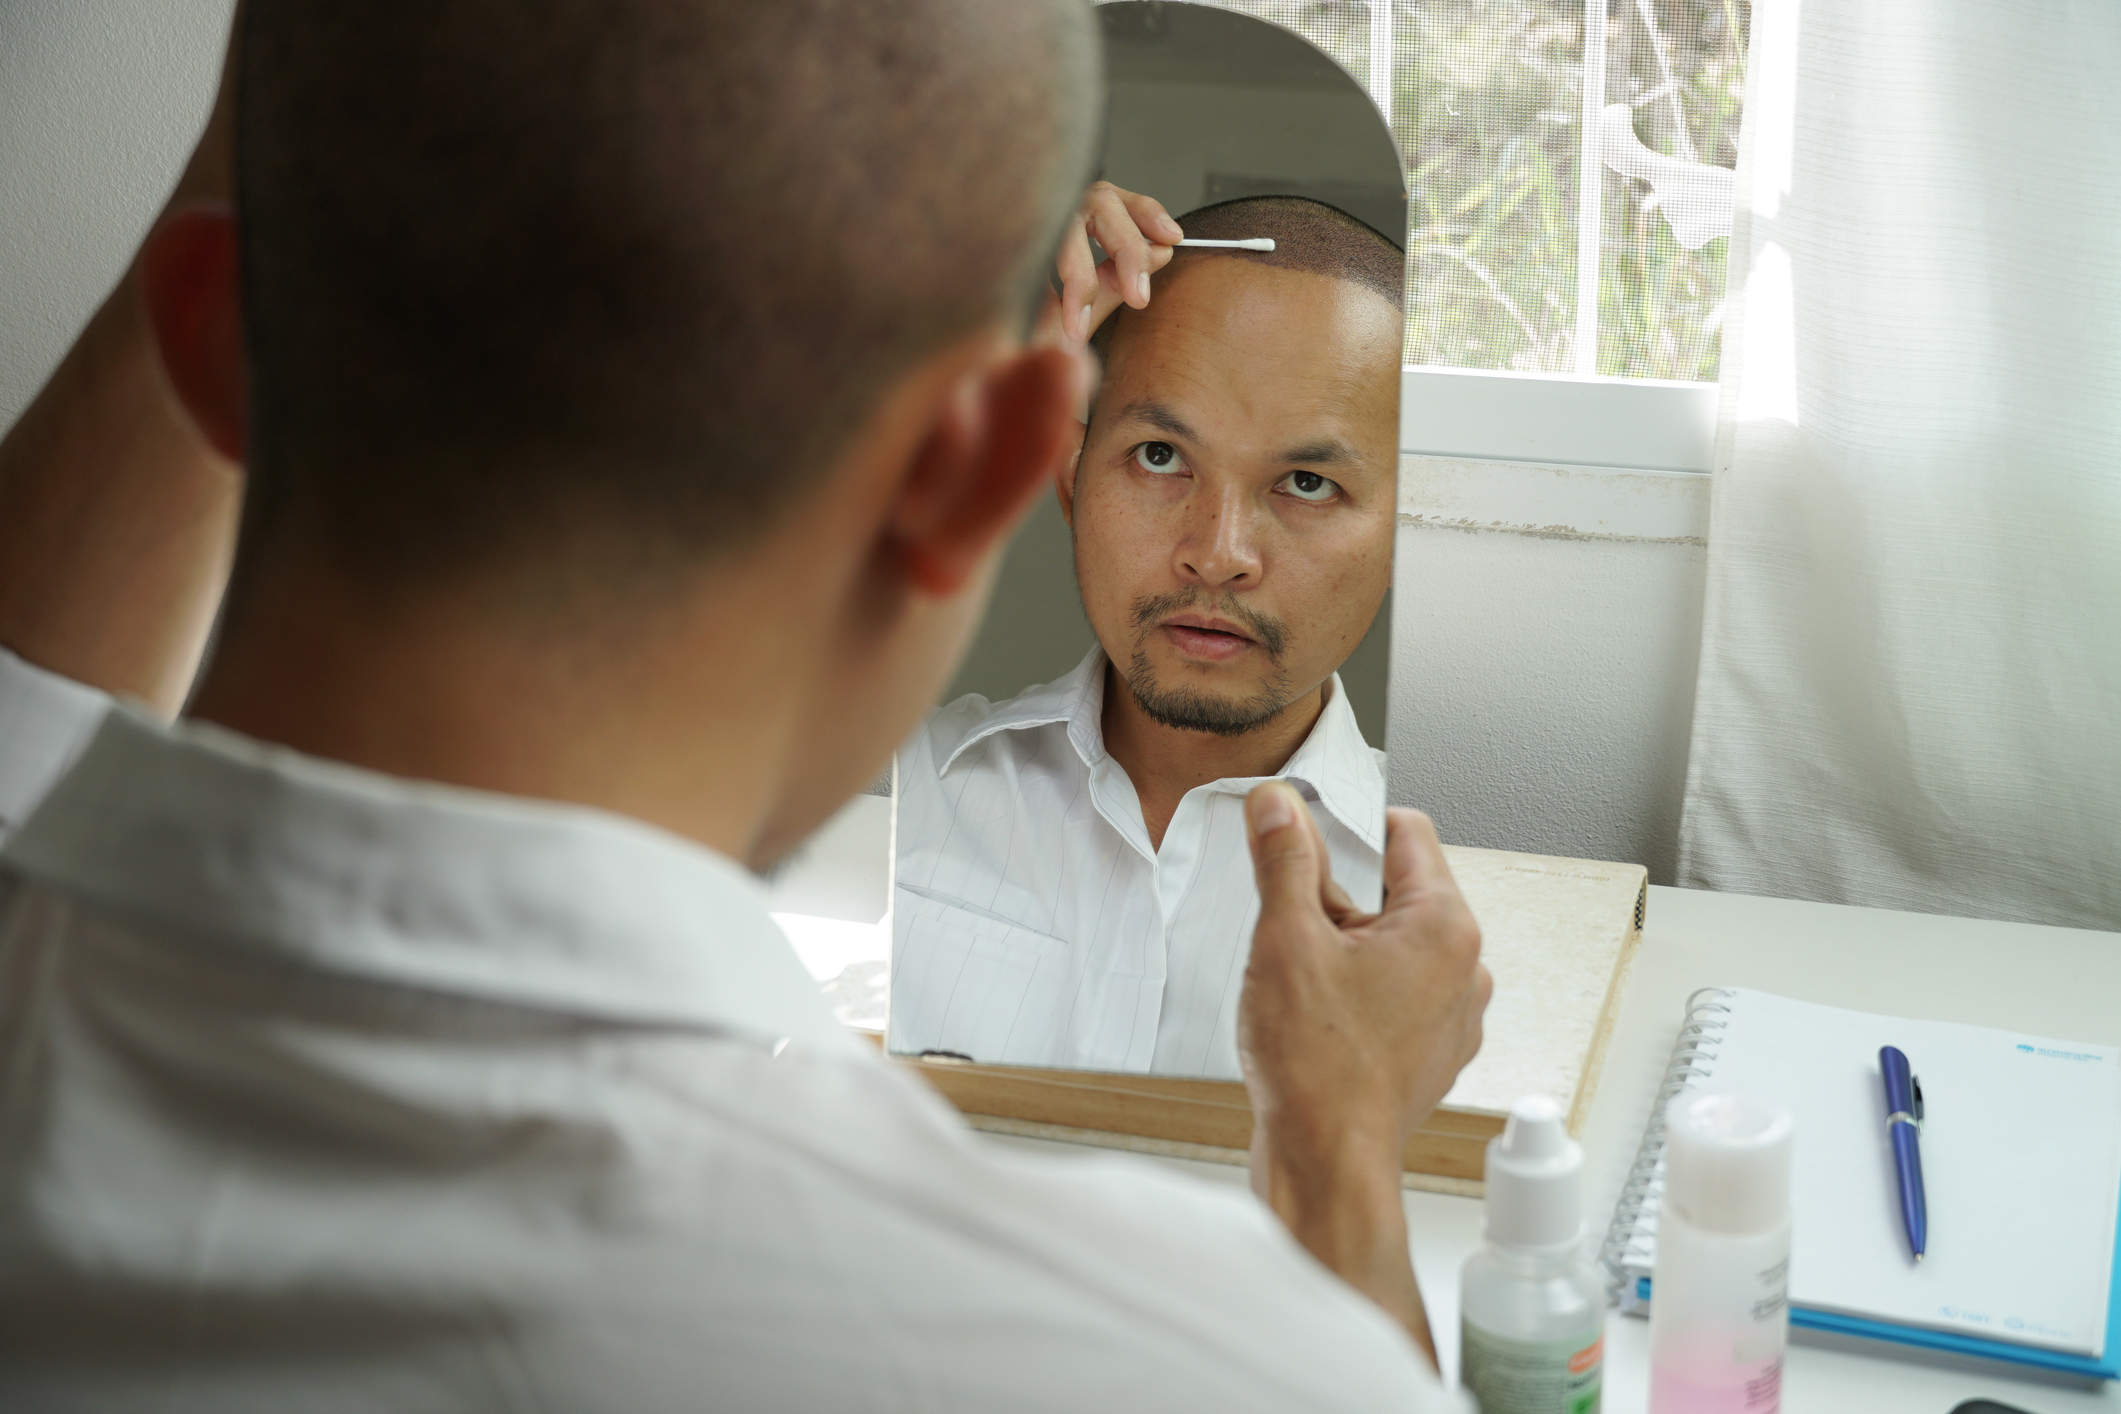 Top Hair Loss Treatments for Men, Backed by Science